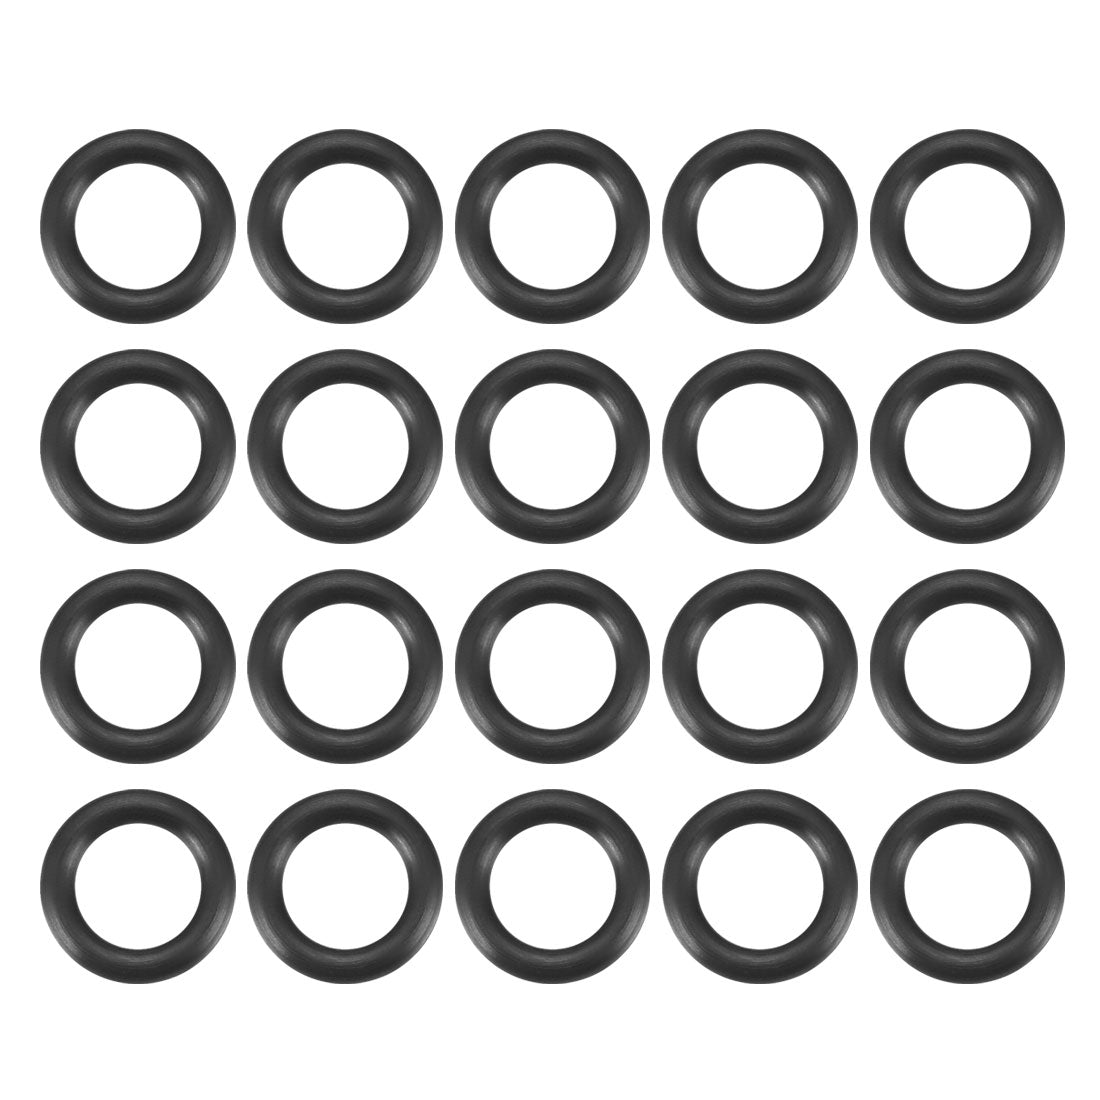 uxcell Uxcell 10mm x 6mm x 2mm Rubber Oil Seal O Ring Gasket Washer Black 20 Pcs